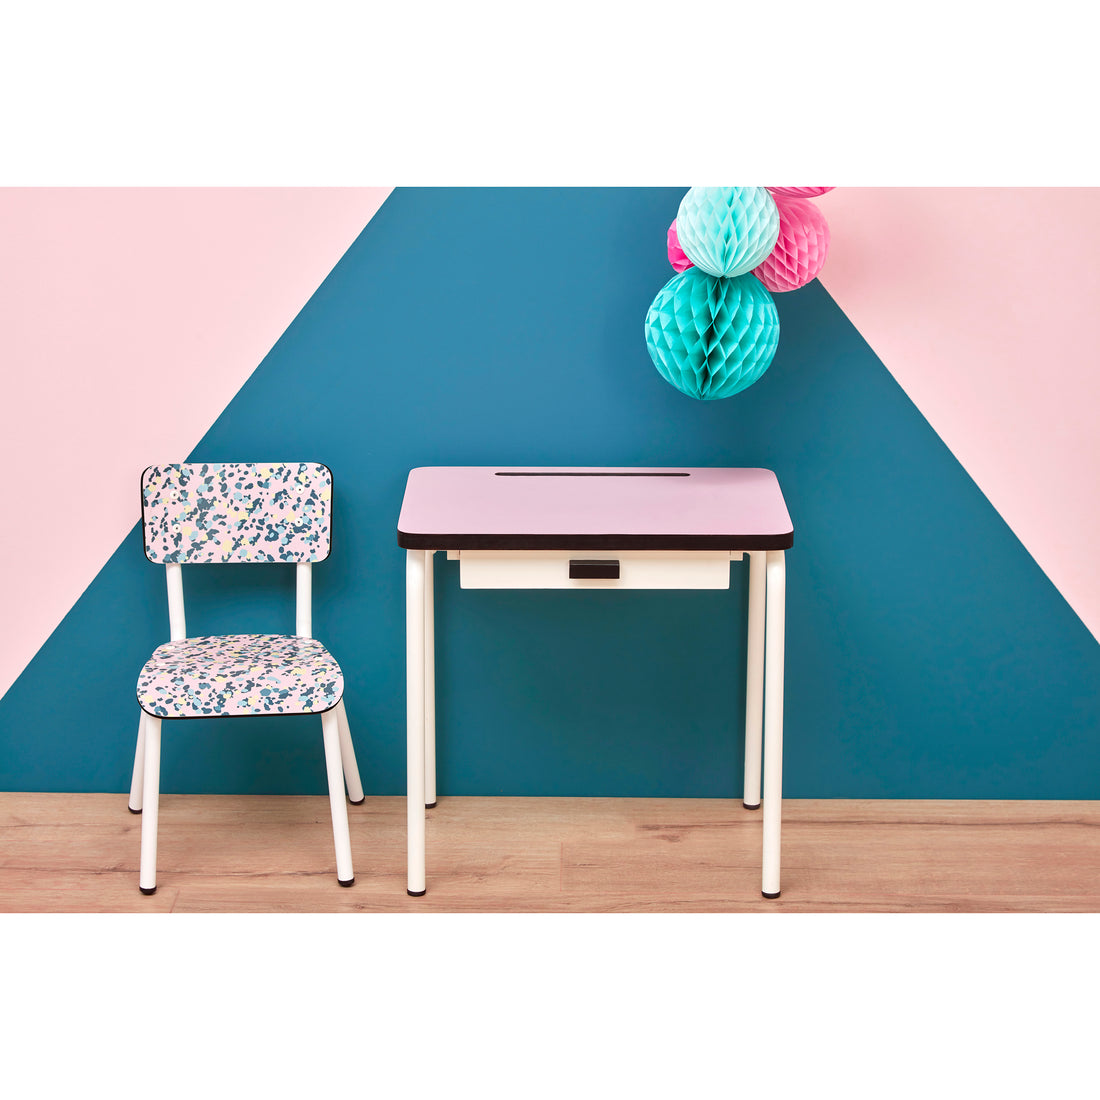 Les Gambettes Little Suzie Chair Light Grey (Pre-Order; Est. Delivery in 6-10 Weeks)